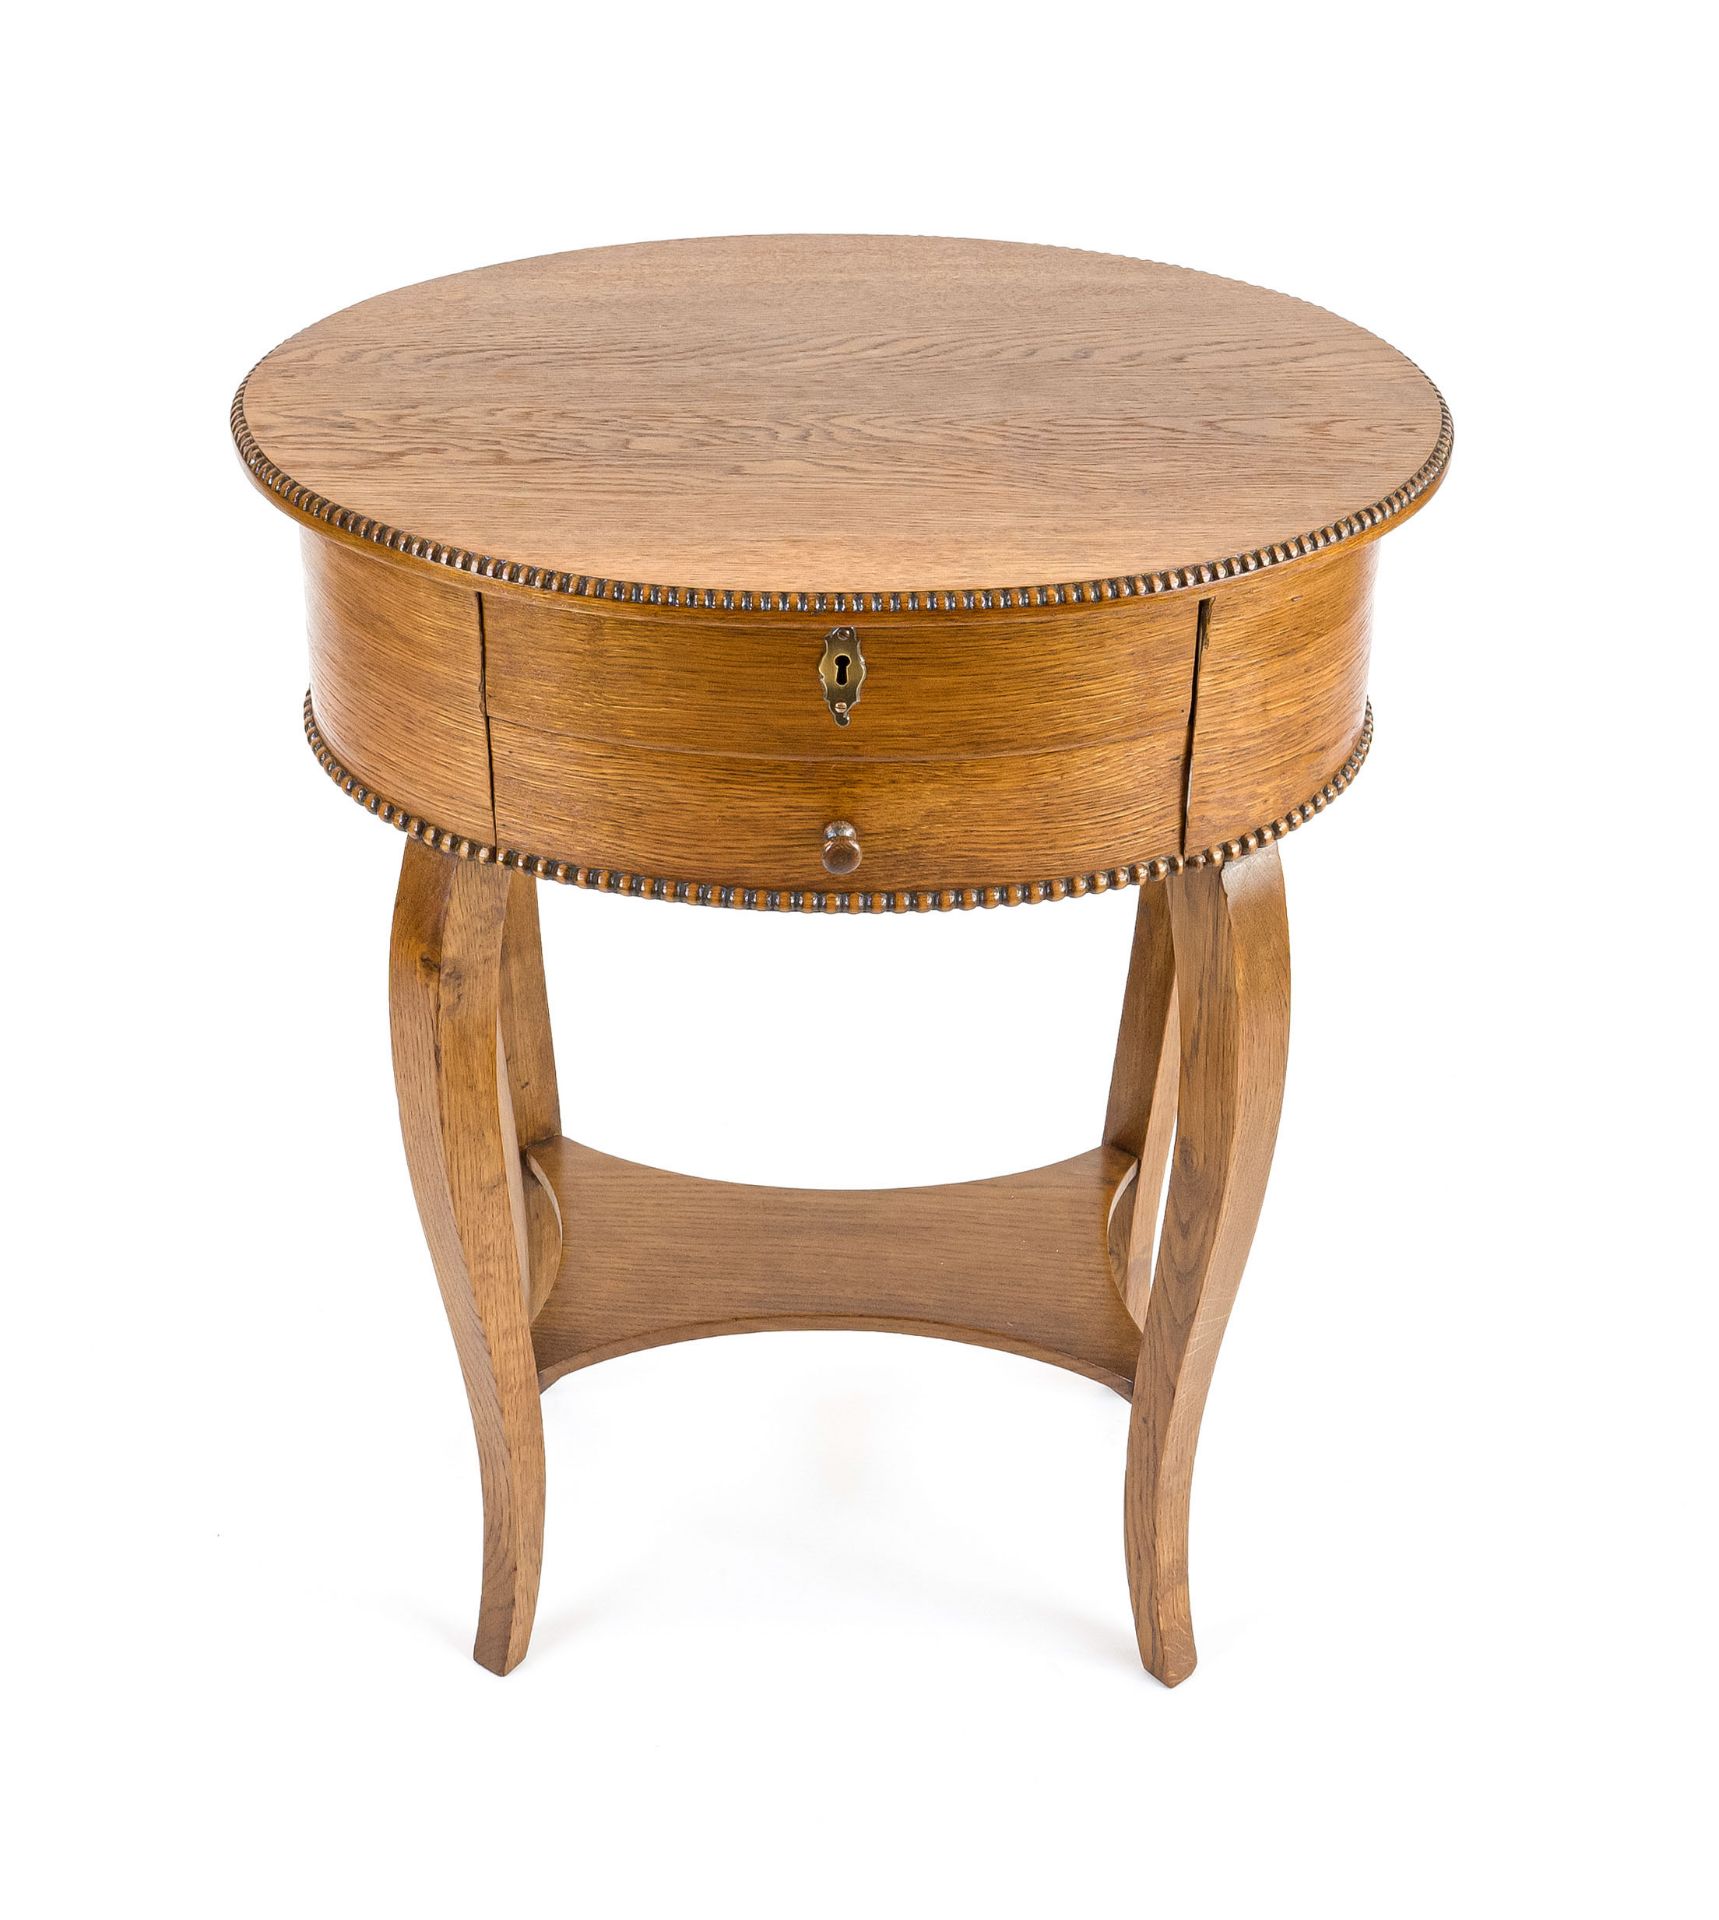 Handmade/sewing table from around 1930, oak, all-round beaded band, oval shape, 2 drawers, 77 x 61 x